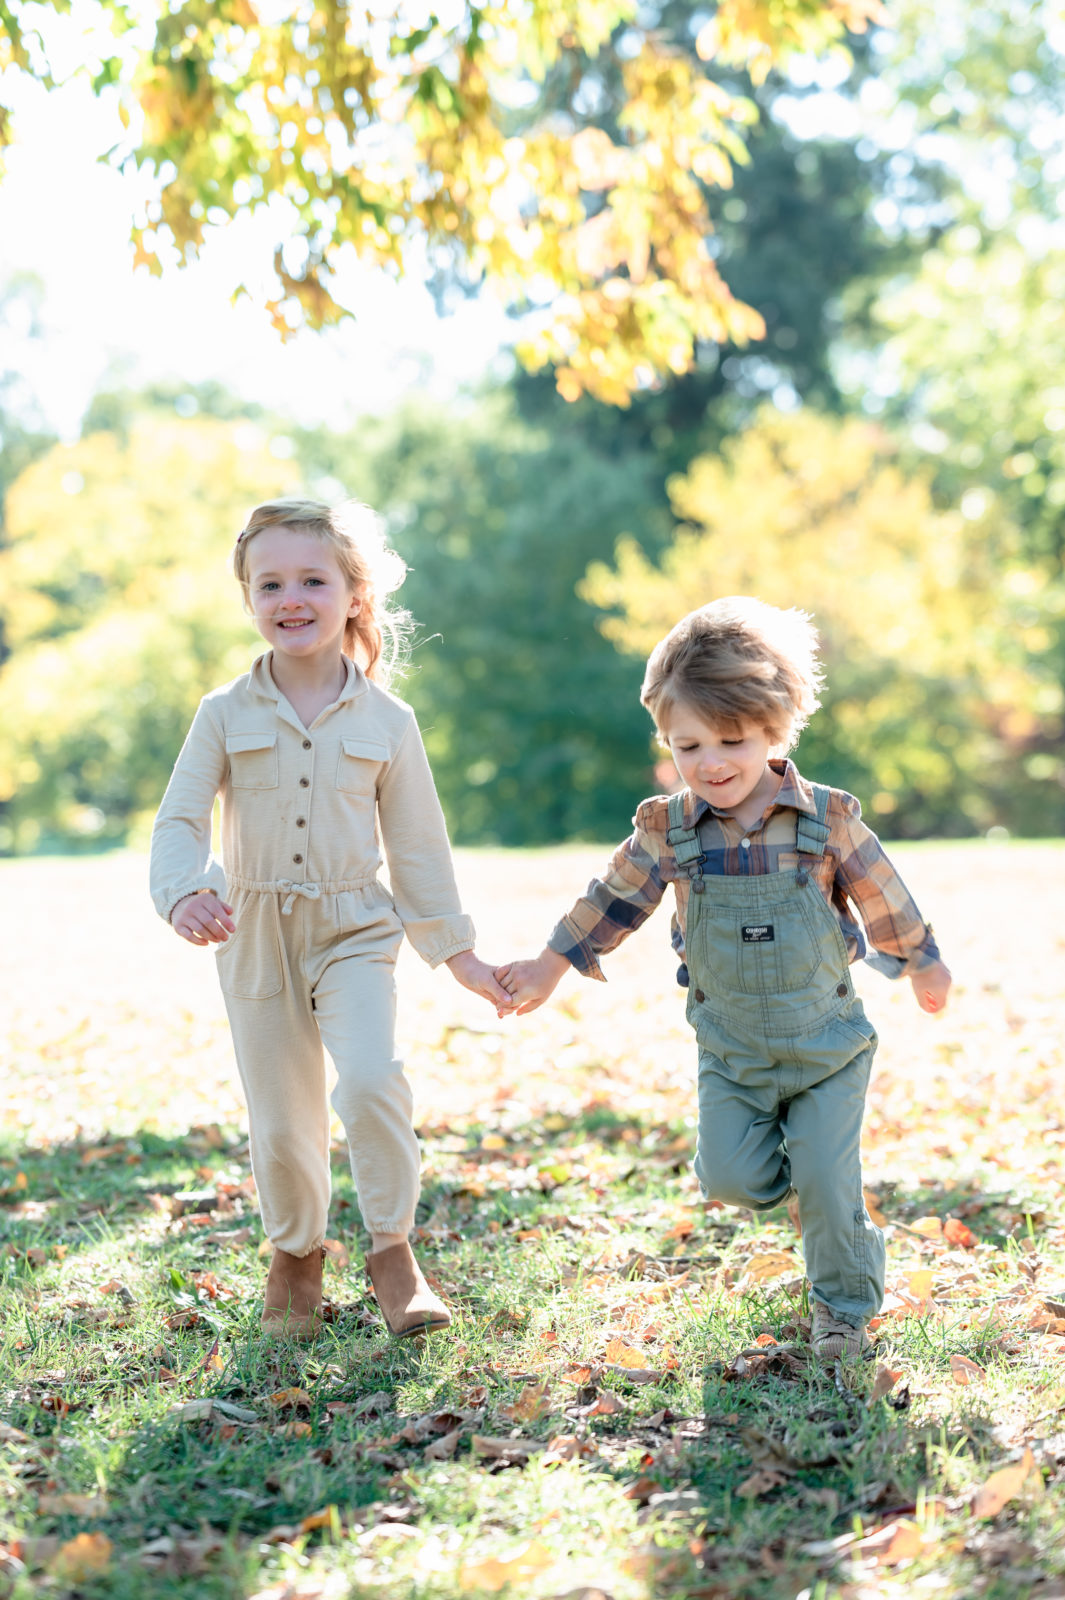 Brother and sister run towards the camera, smiling and holding hands during annual family portrait session.